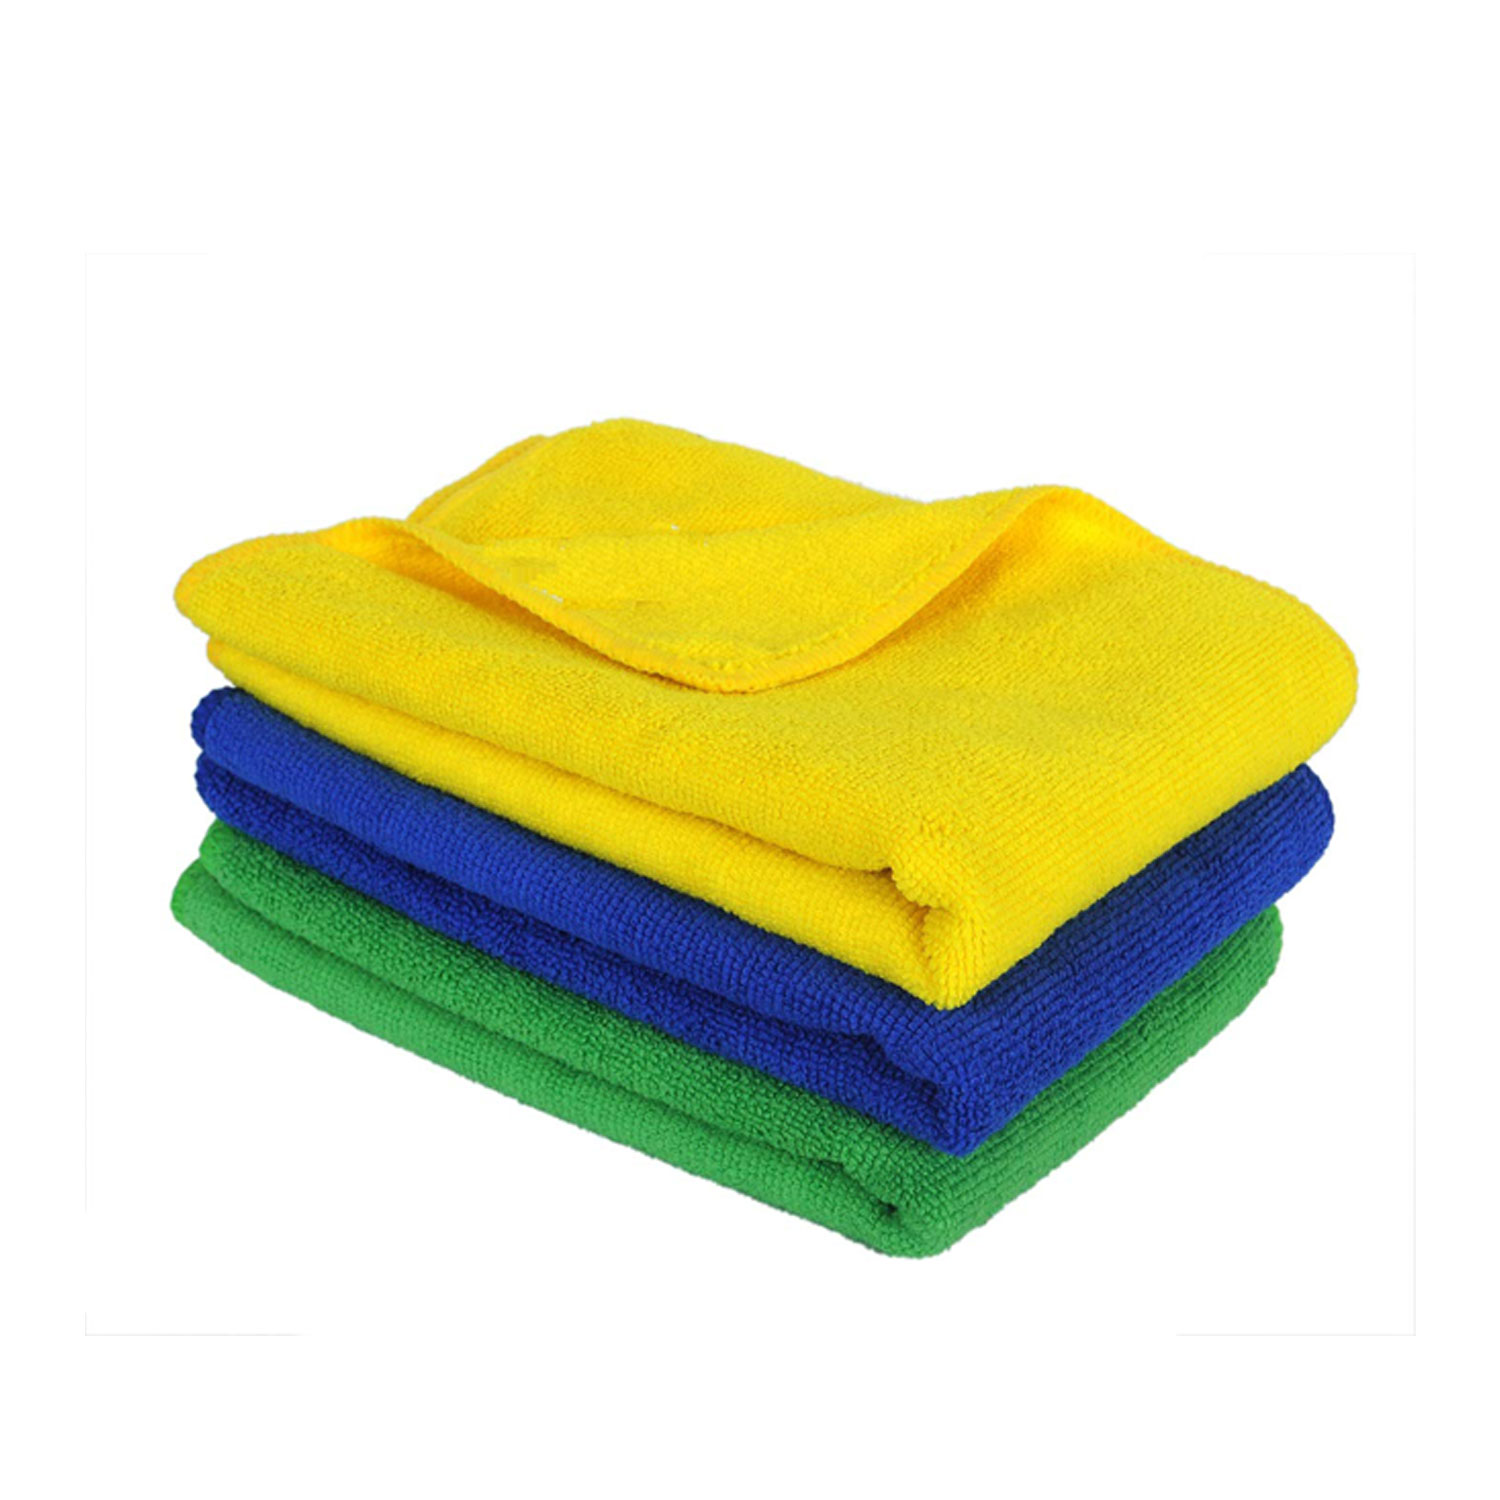 Sheen Microfiber cleaning cloth | Home cleaning cloth | Microfiber cloth | 40 X 60 CM | 270GSM | PACK OF 3